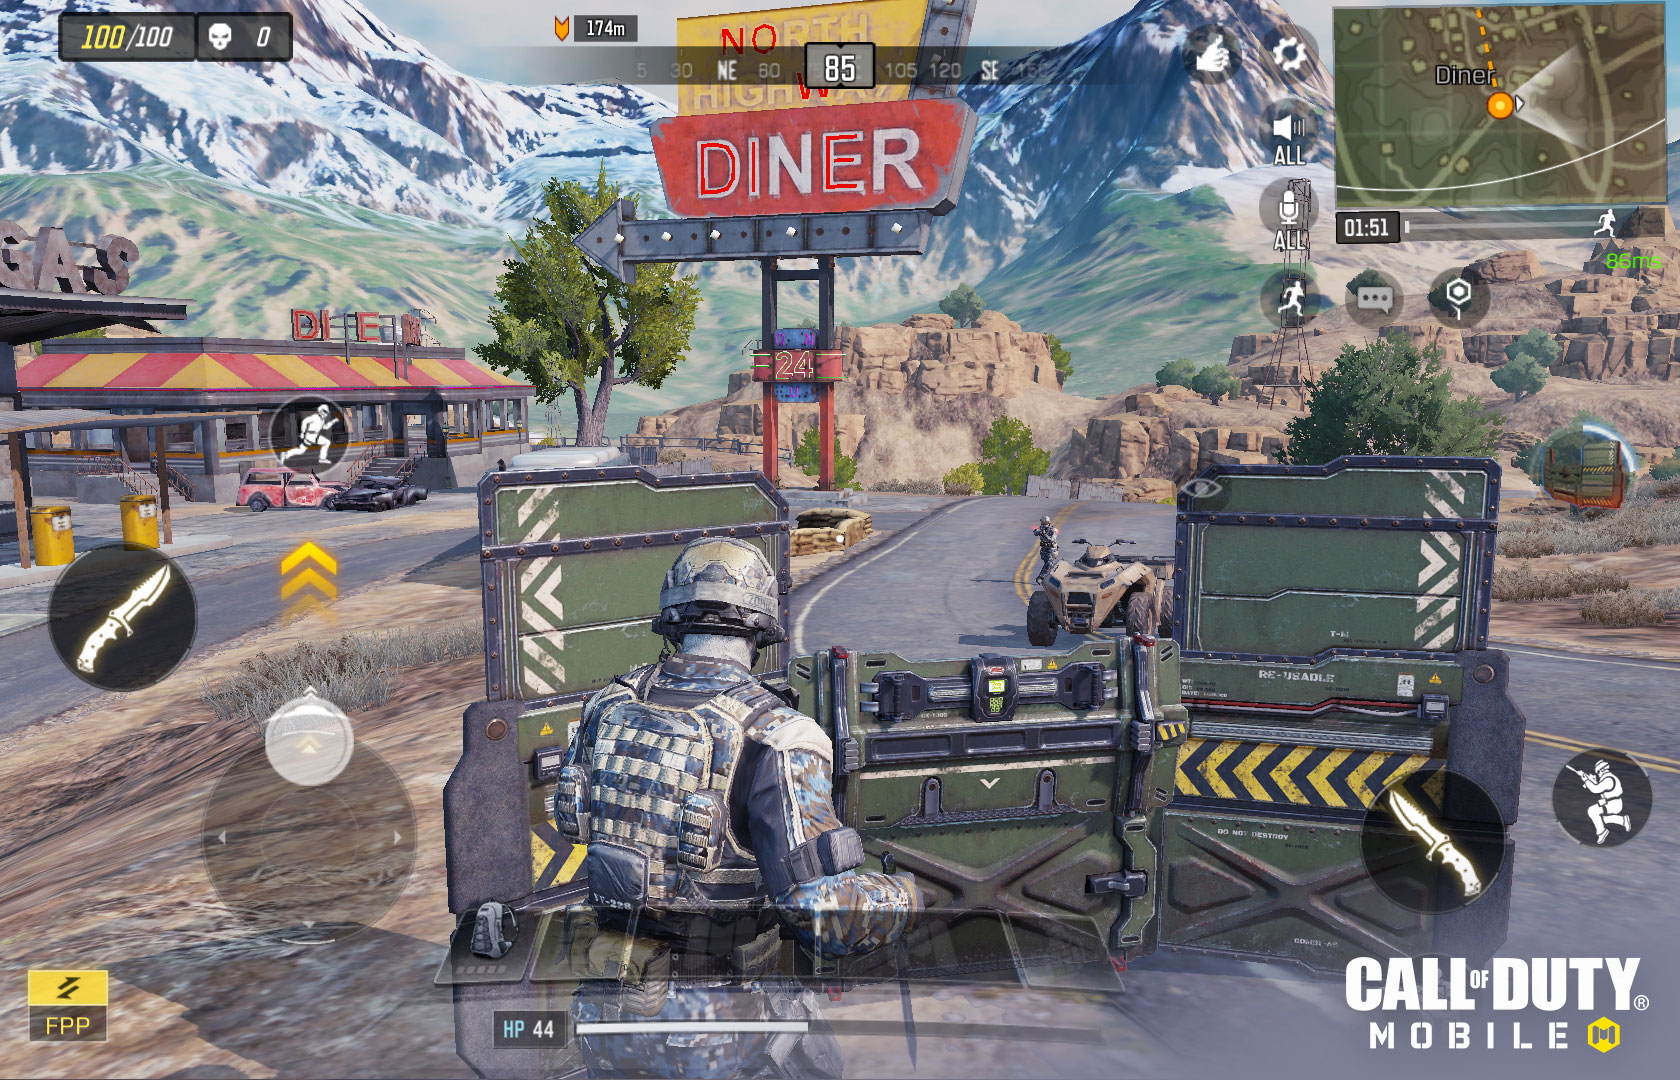 Call of Duty Mobile: Here is how you can customize your profile